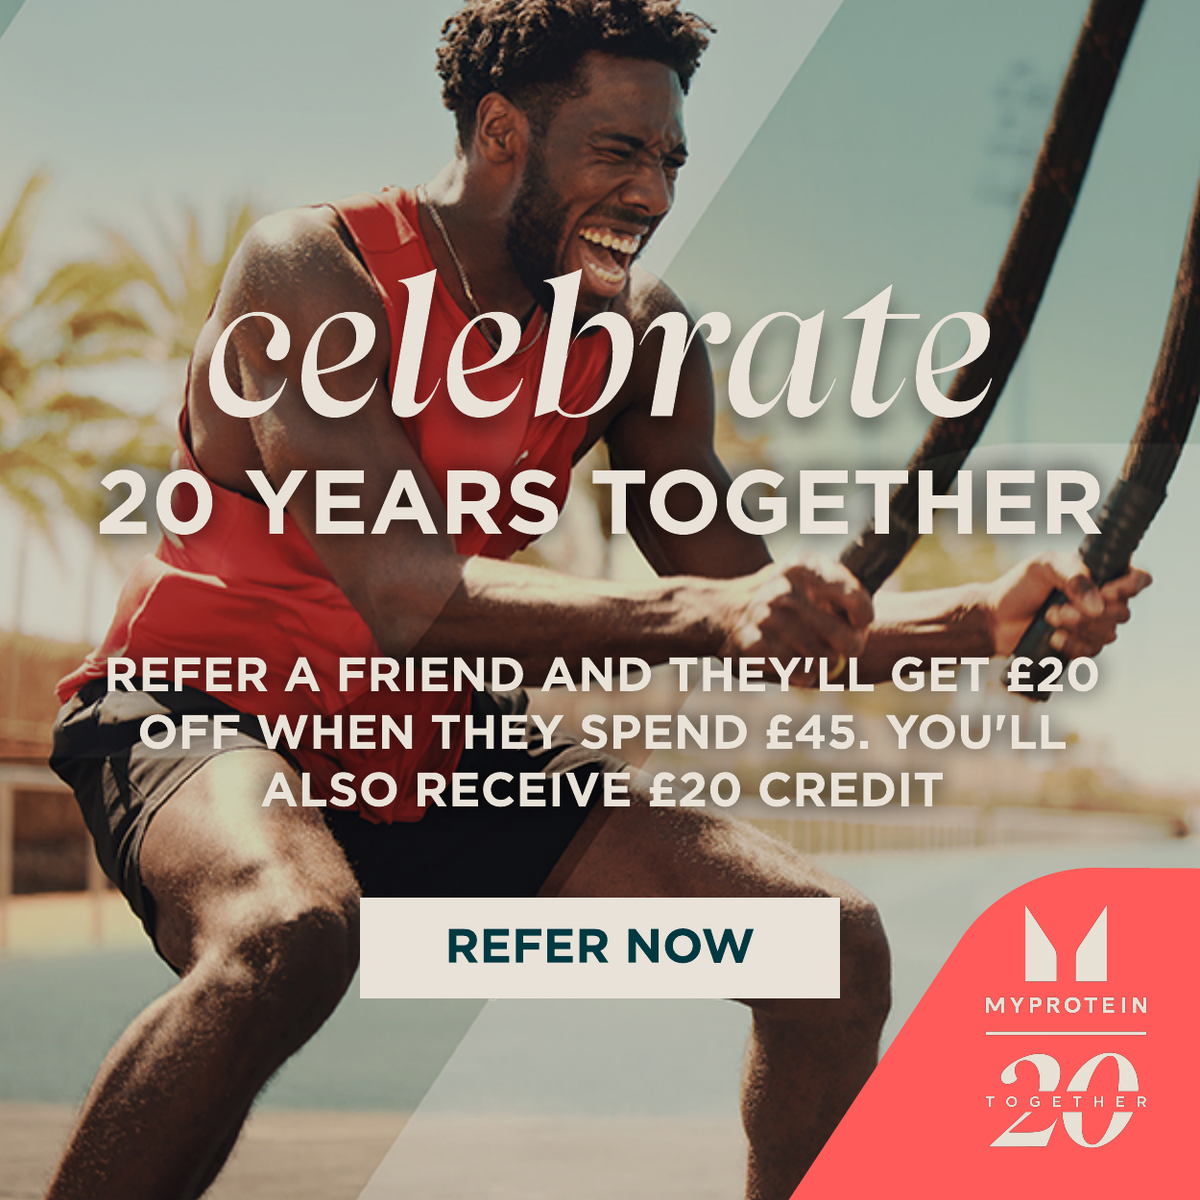 Referral Boost. Refer a friend and they'll get £20 off when they spend £45. You'll also receive £20 credit.